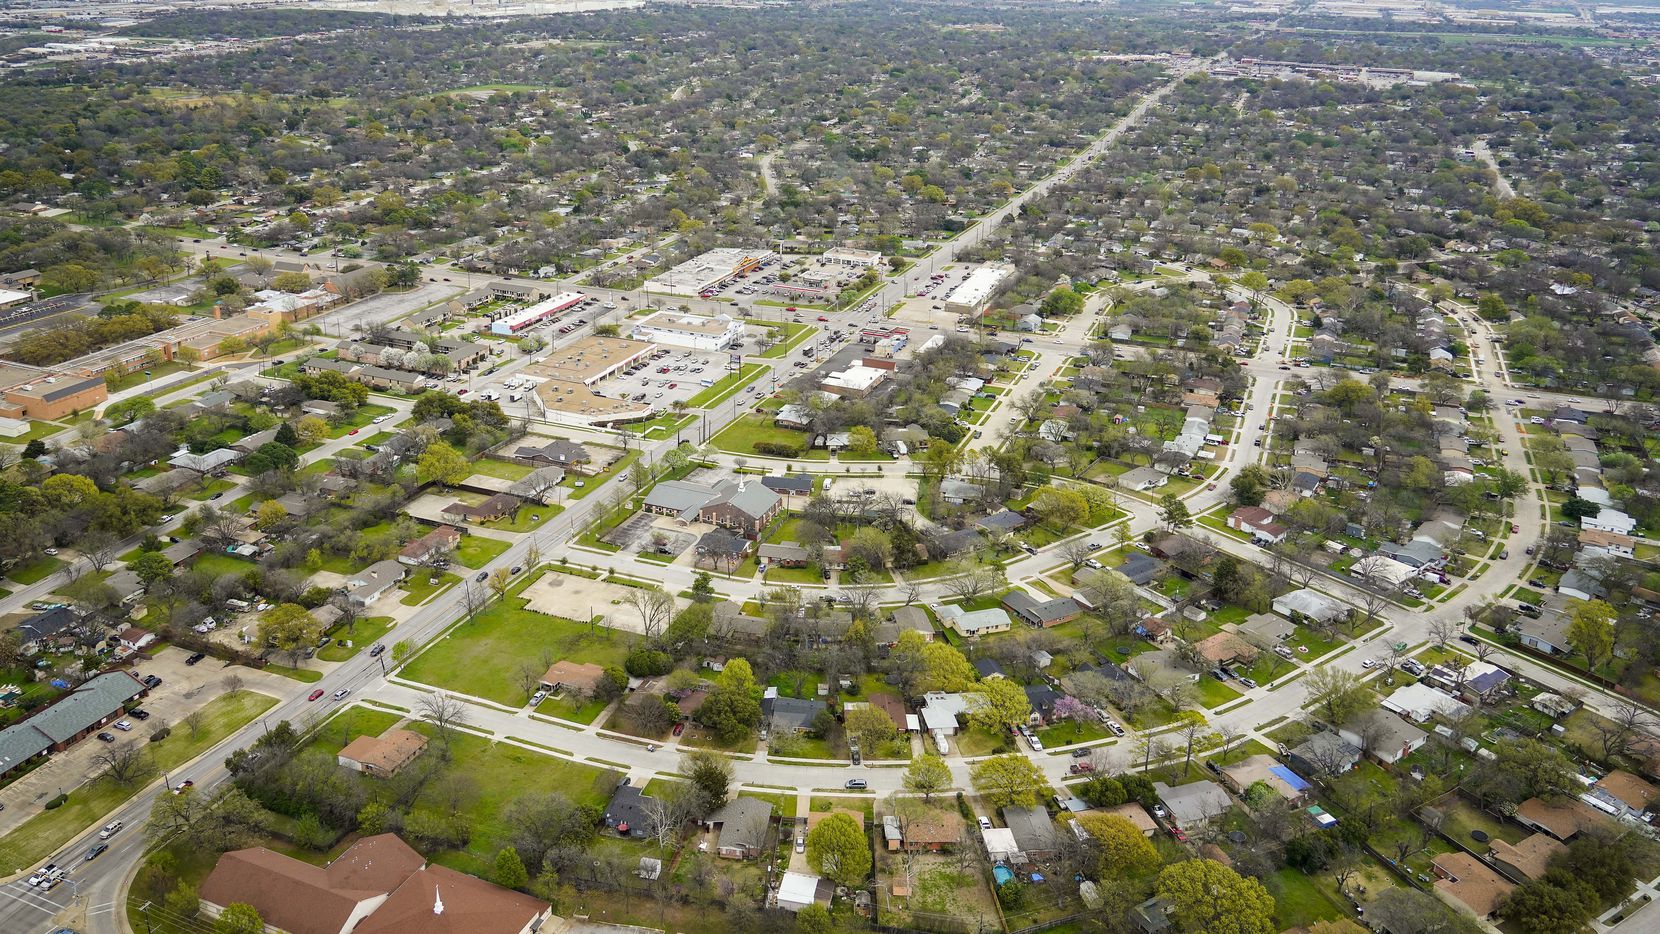 Aerial view of residential neighborhoods and retail on Thursday, March 12, 2020, in Arlington, TX.